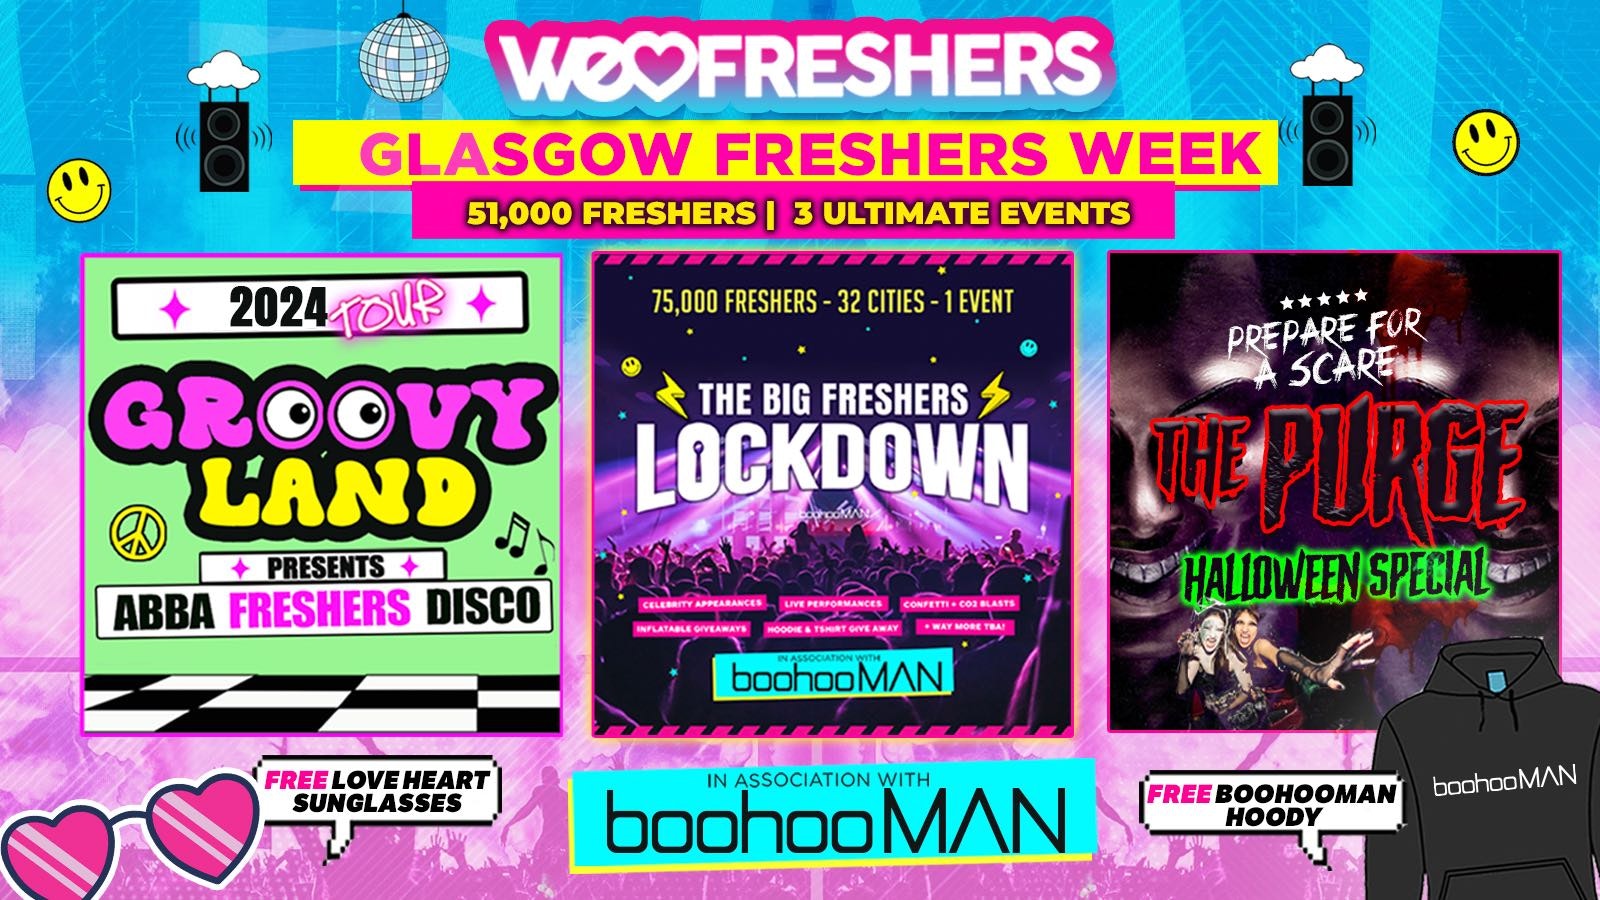 WE LOVE GLASGOW FRESHERS 2024 in association with boohooMAN -3 EVENTS❗